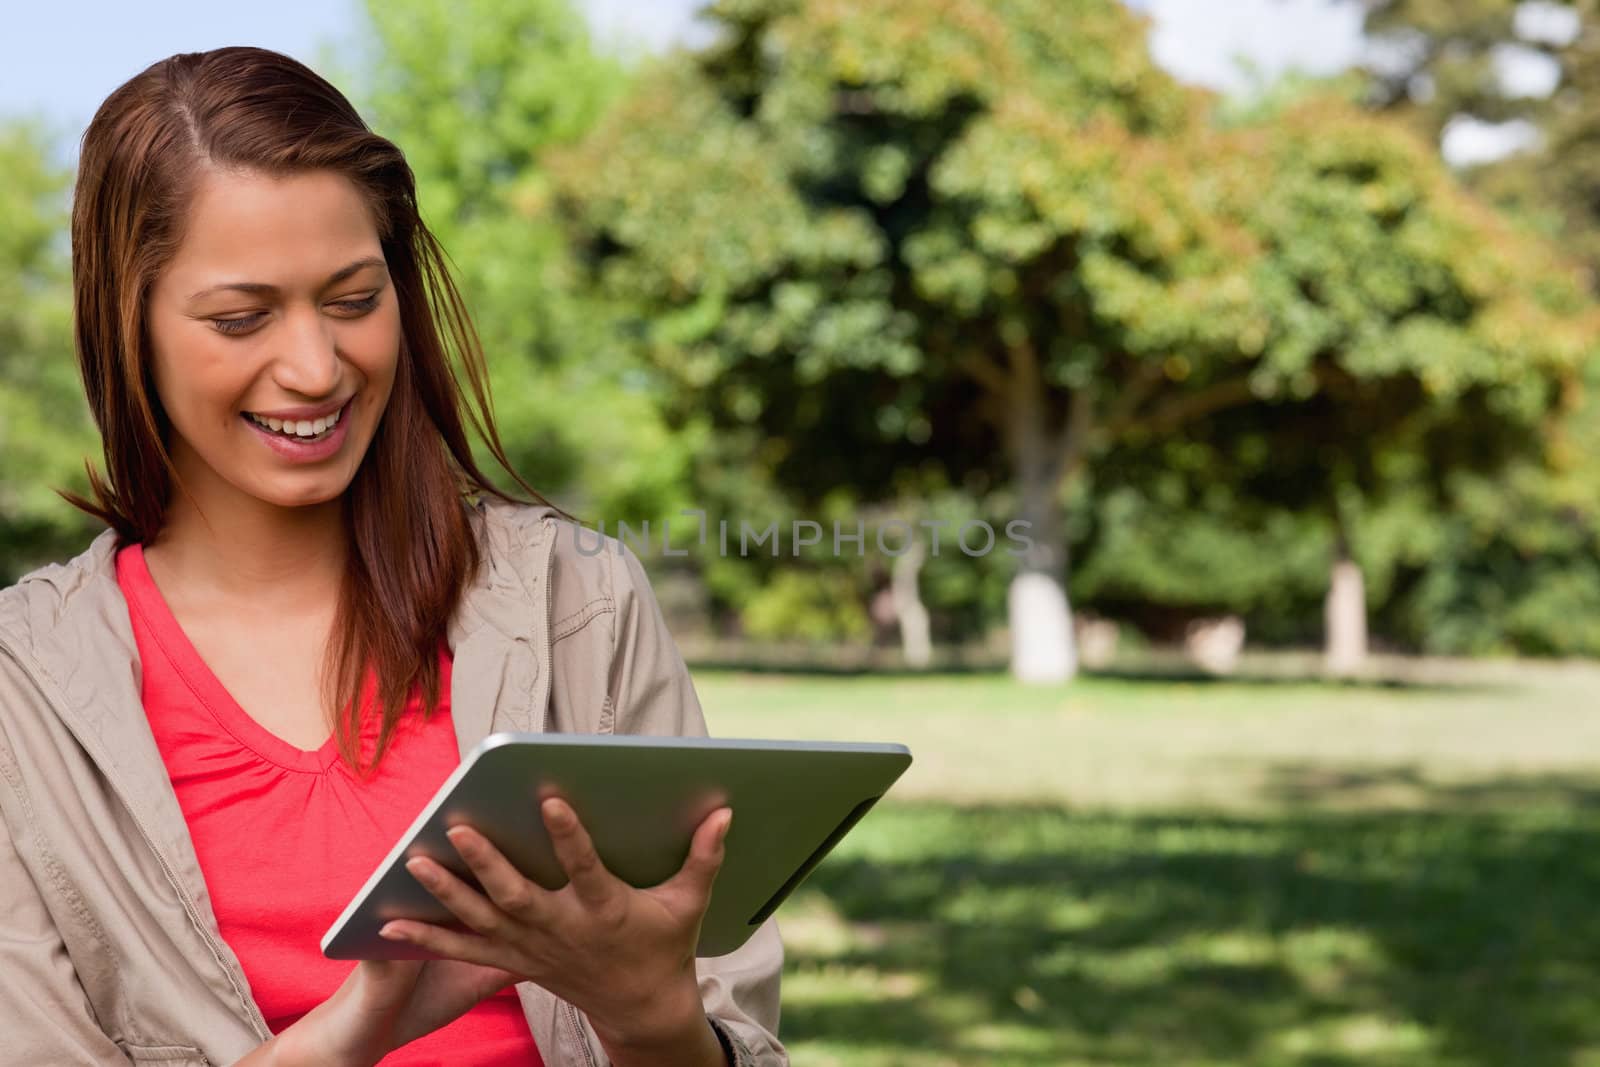 Young woman smiling enthusiastically while using a tablet by Wavebreakmedia